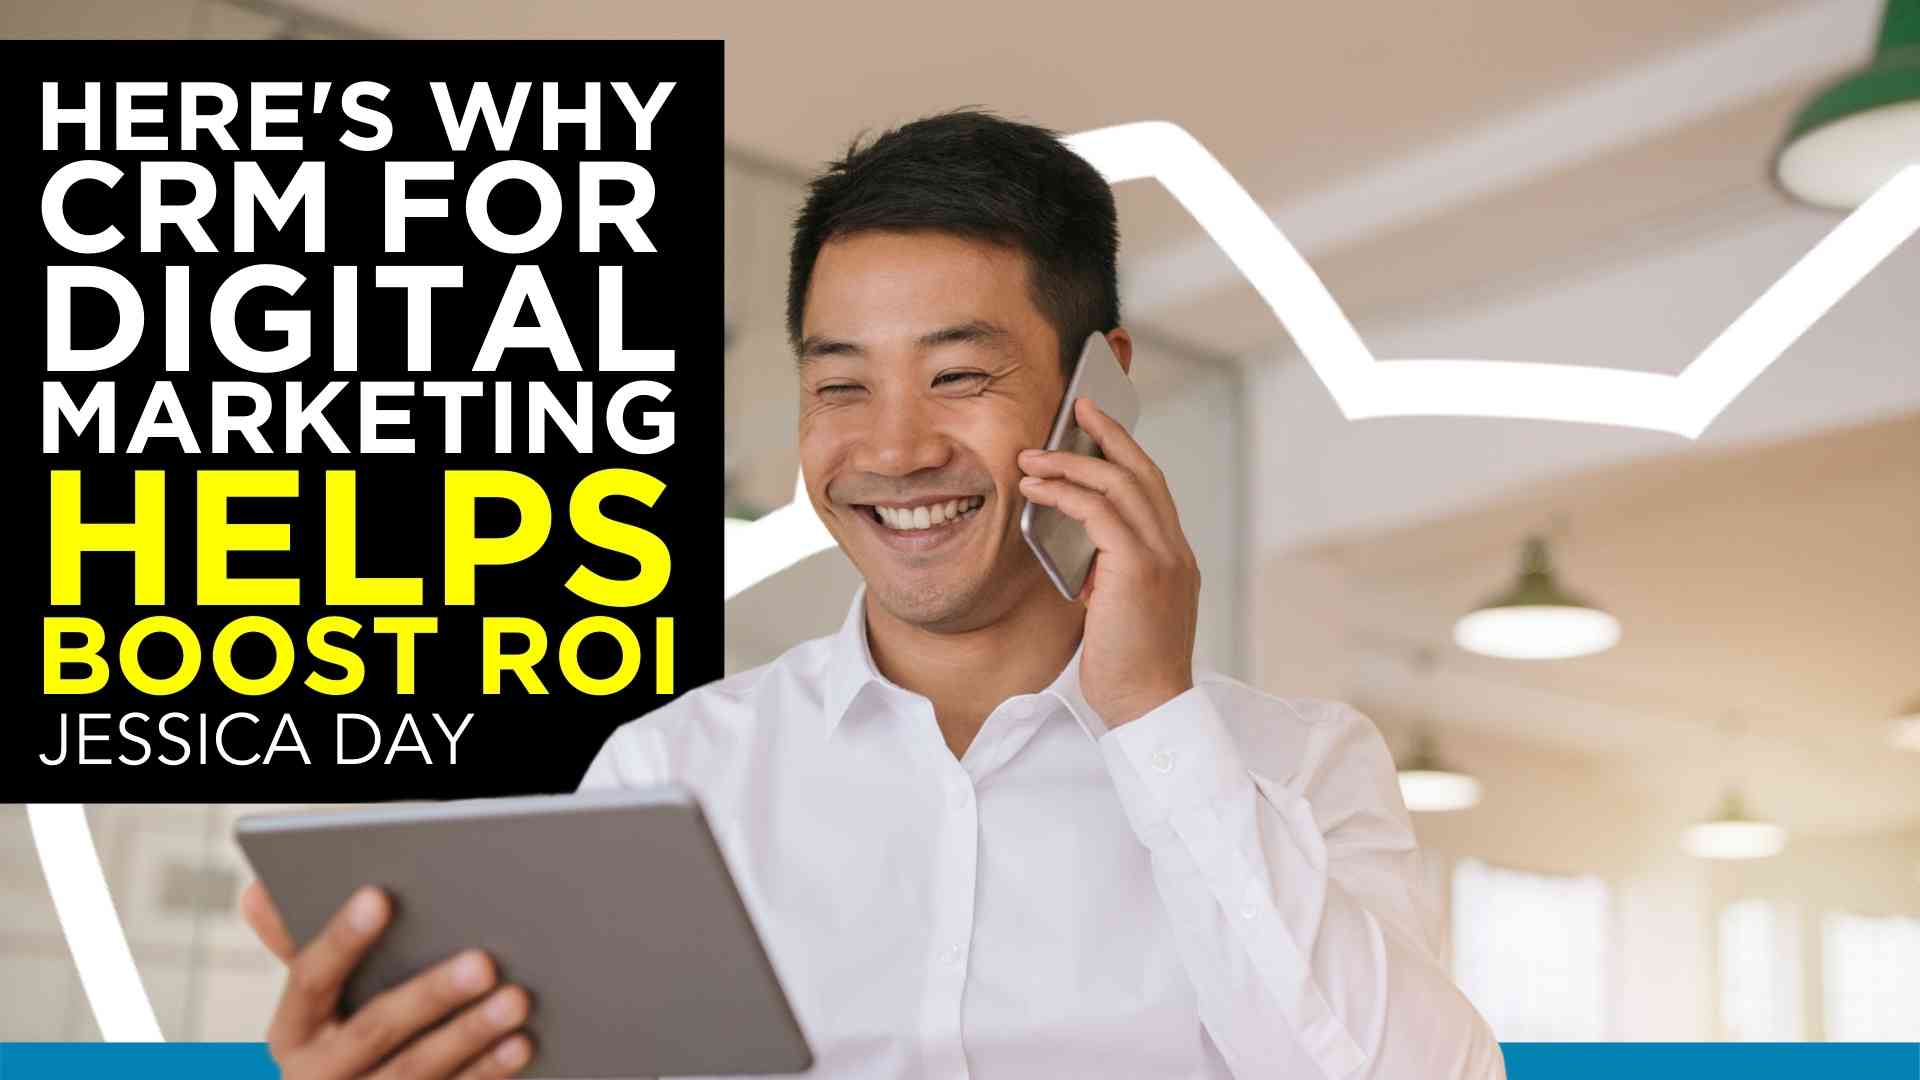 Here’s Why CRM For Digital Marketing Helps Boost ROI